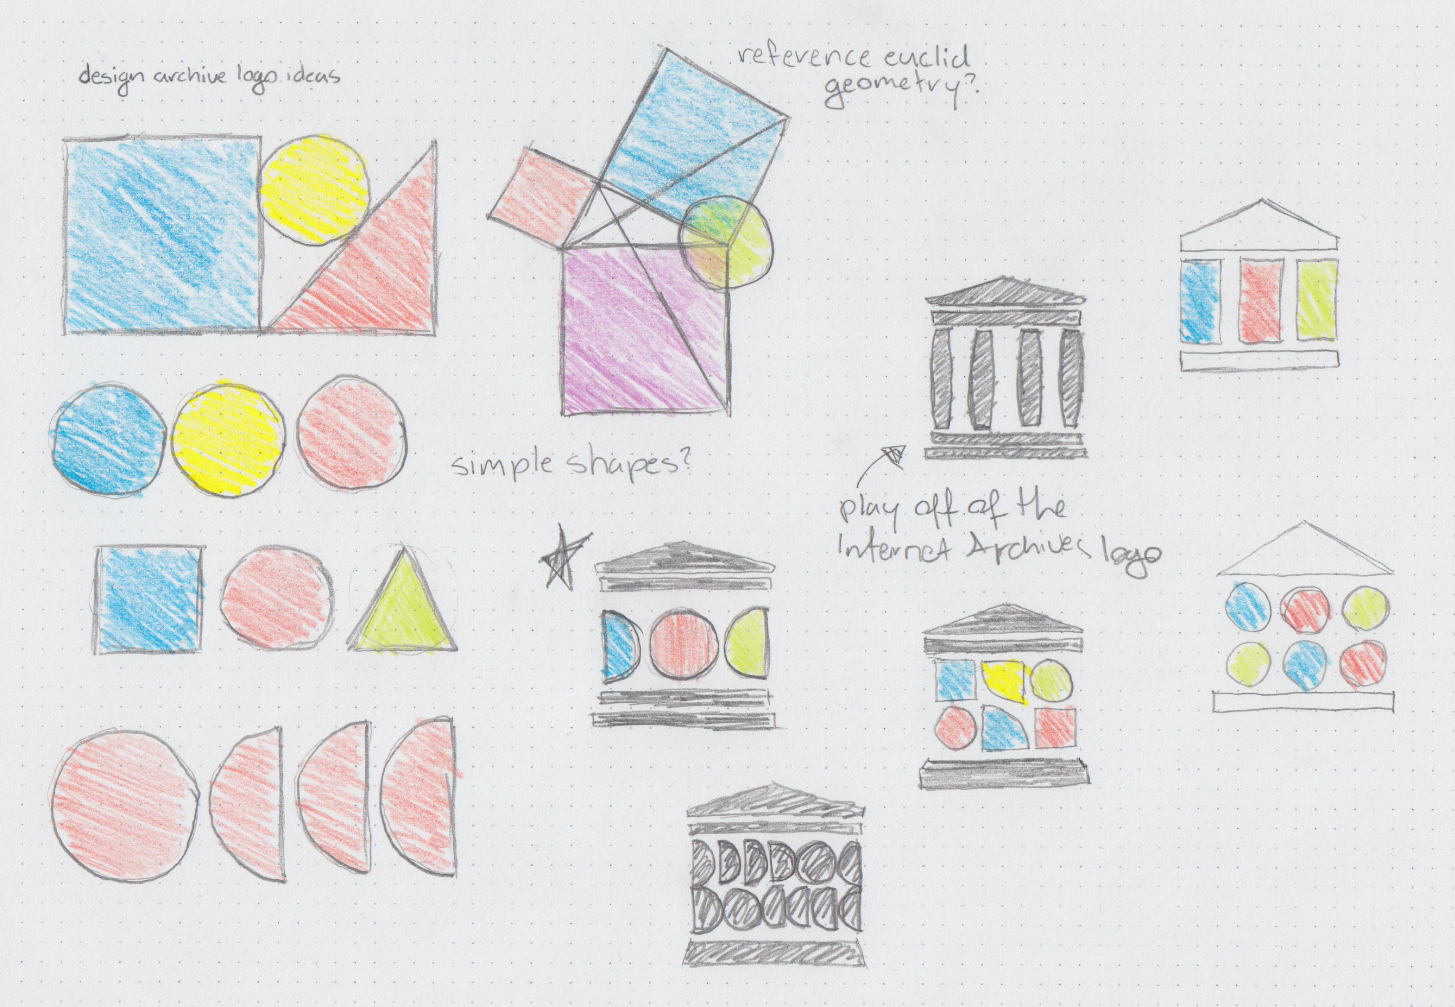 A collection of concept sketches for the archives.design logo mark. They incorporate basic shapes and geometry and play off of the existing Internet Archive logomark.